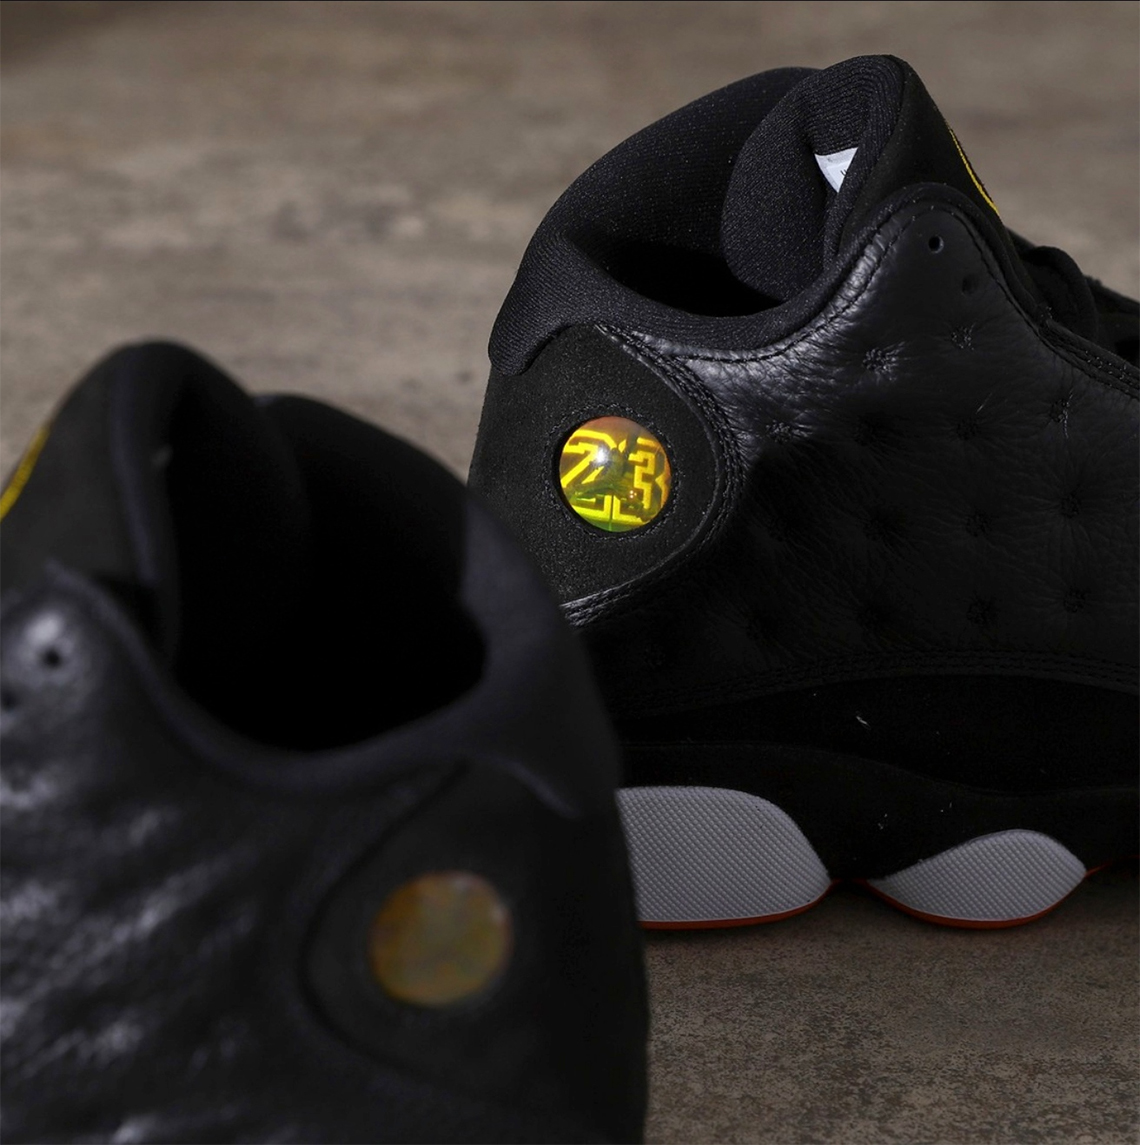 The Air Jordan 13 'Playoffs' Just Re-Released. Here's How to Buy